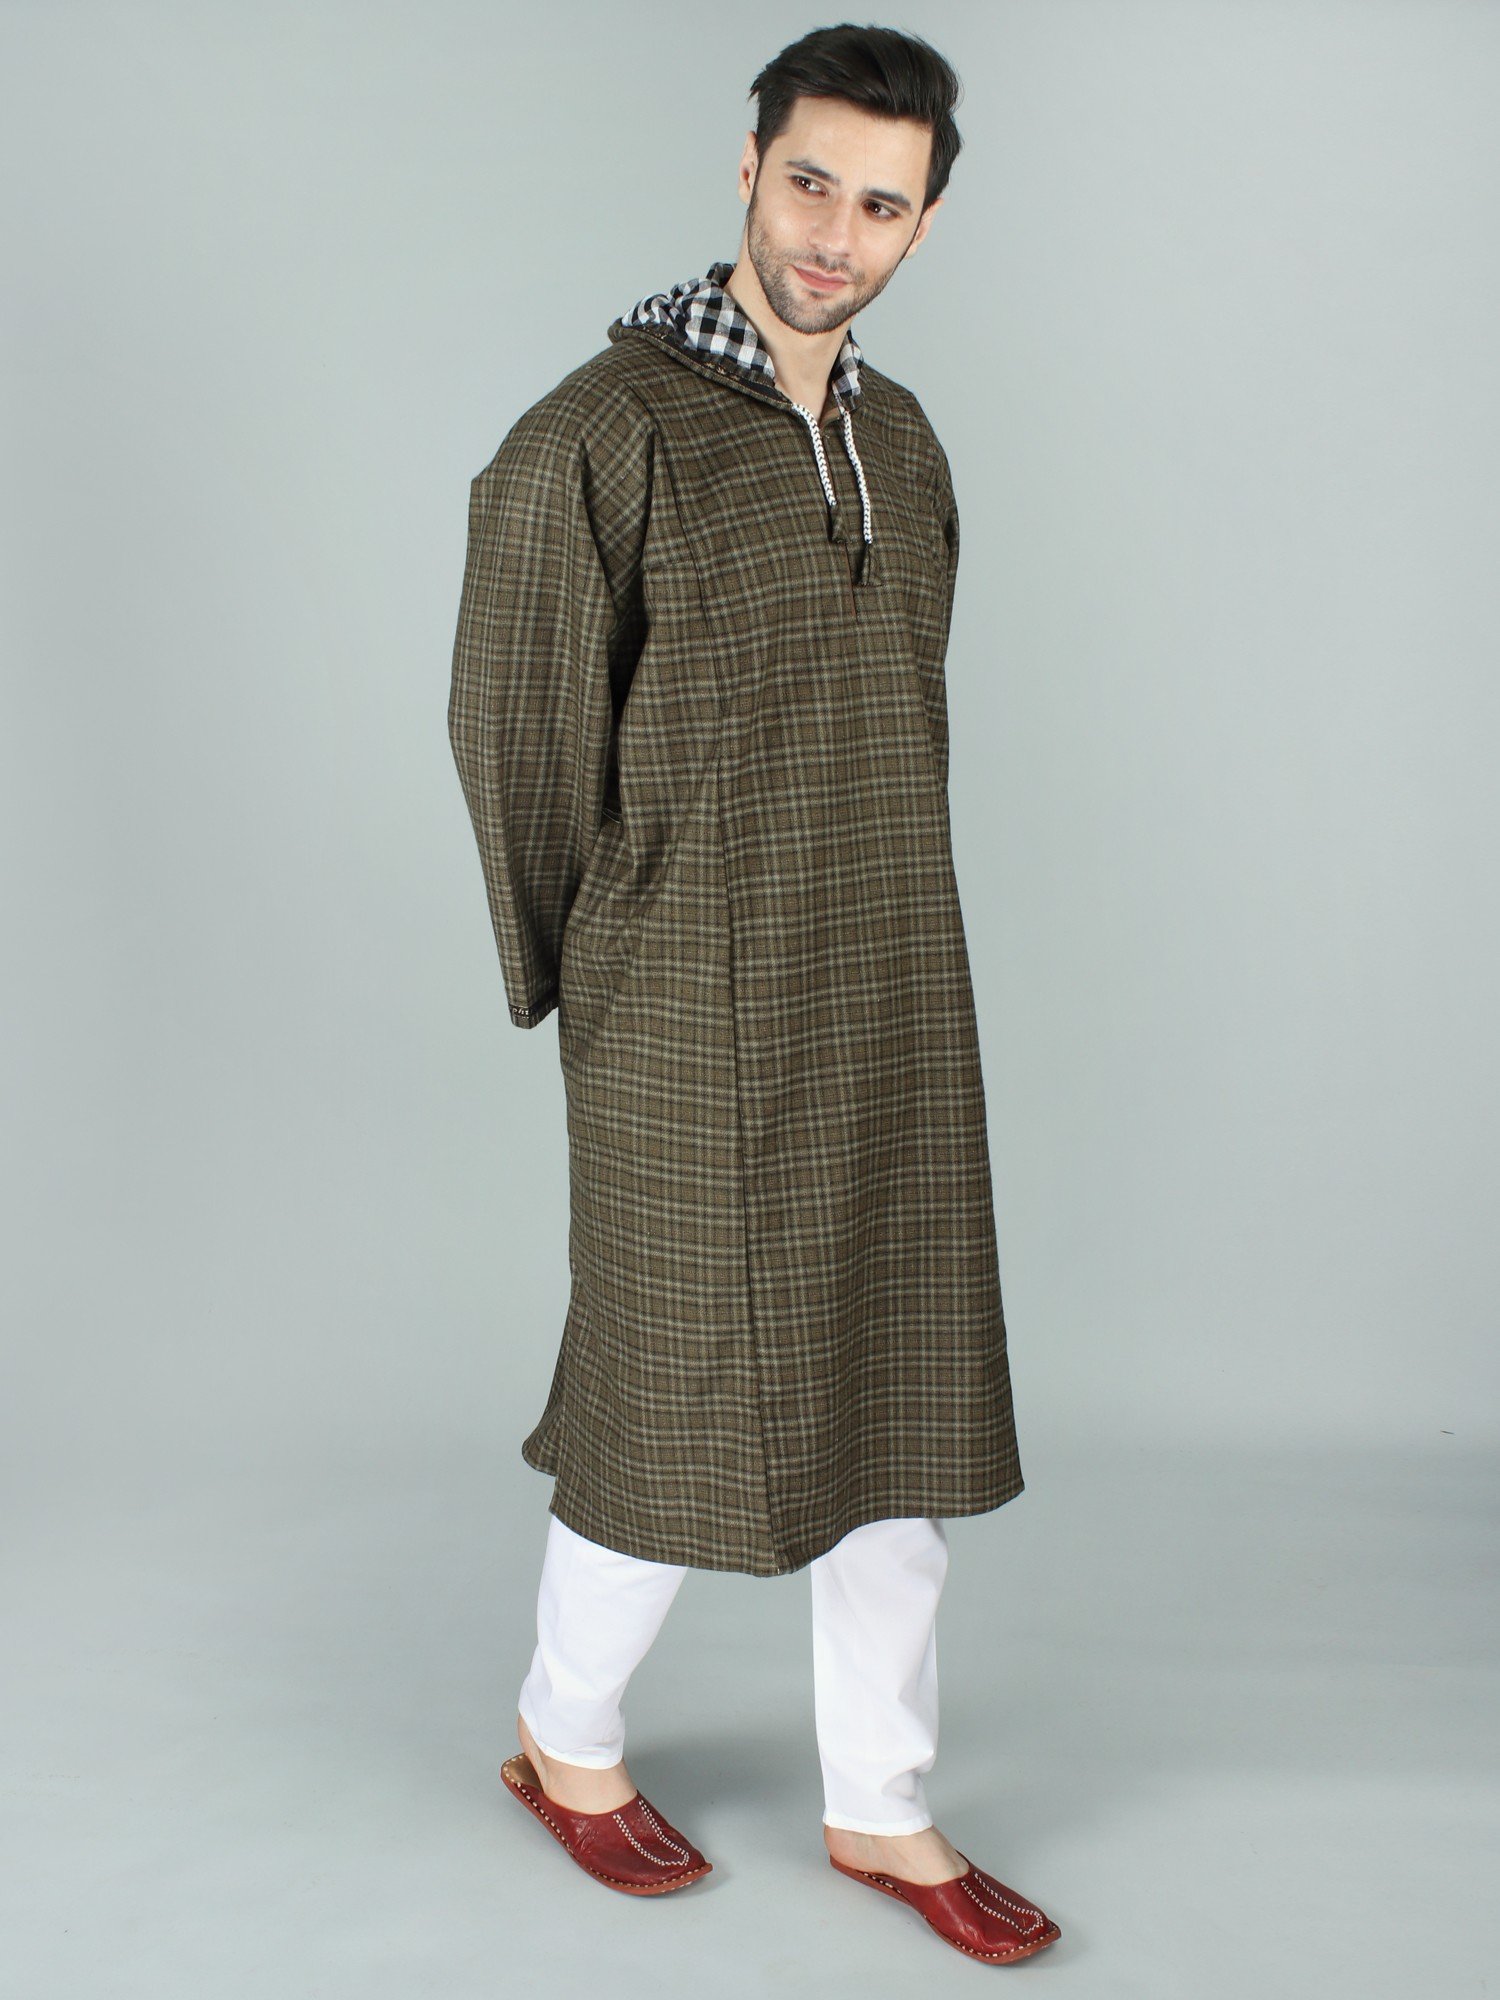 Exotic India Phiran for Men from Kashmir with Hood